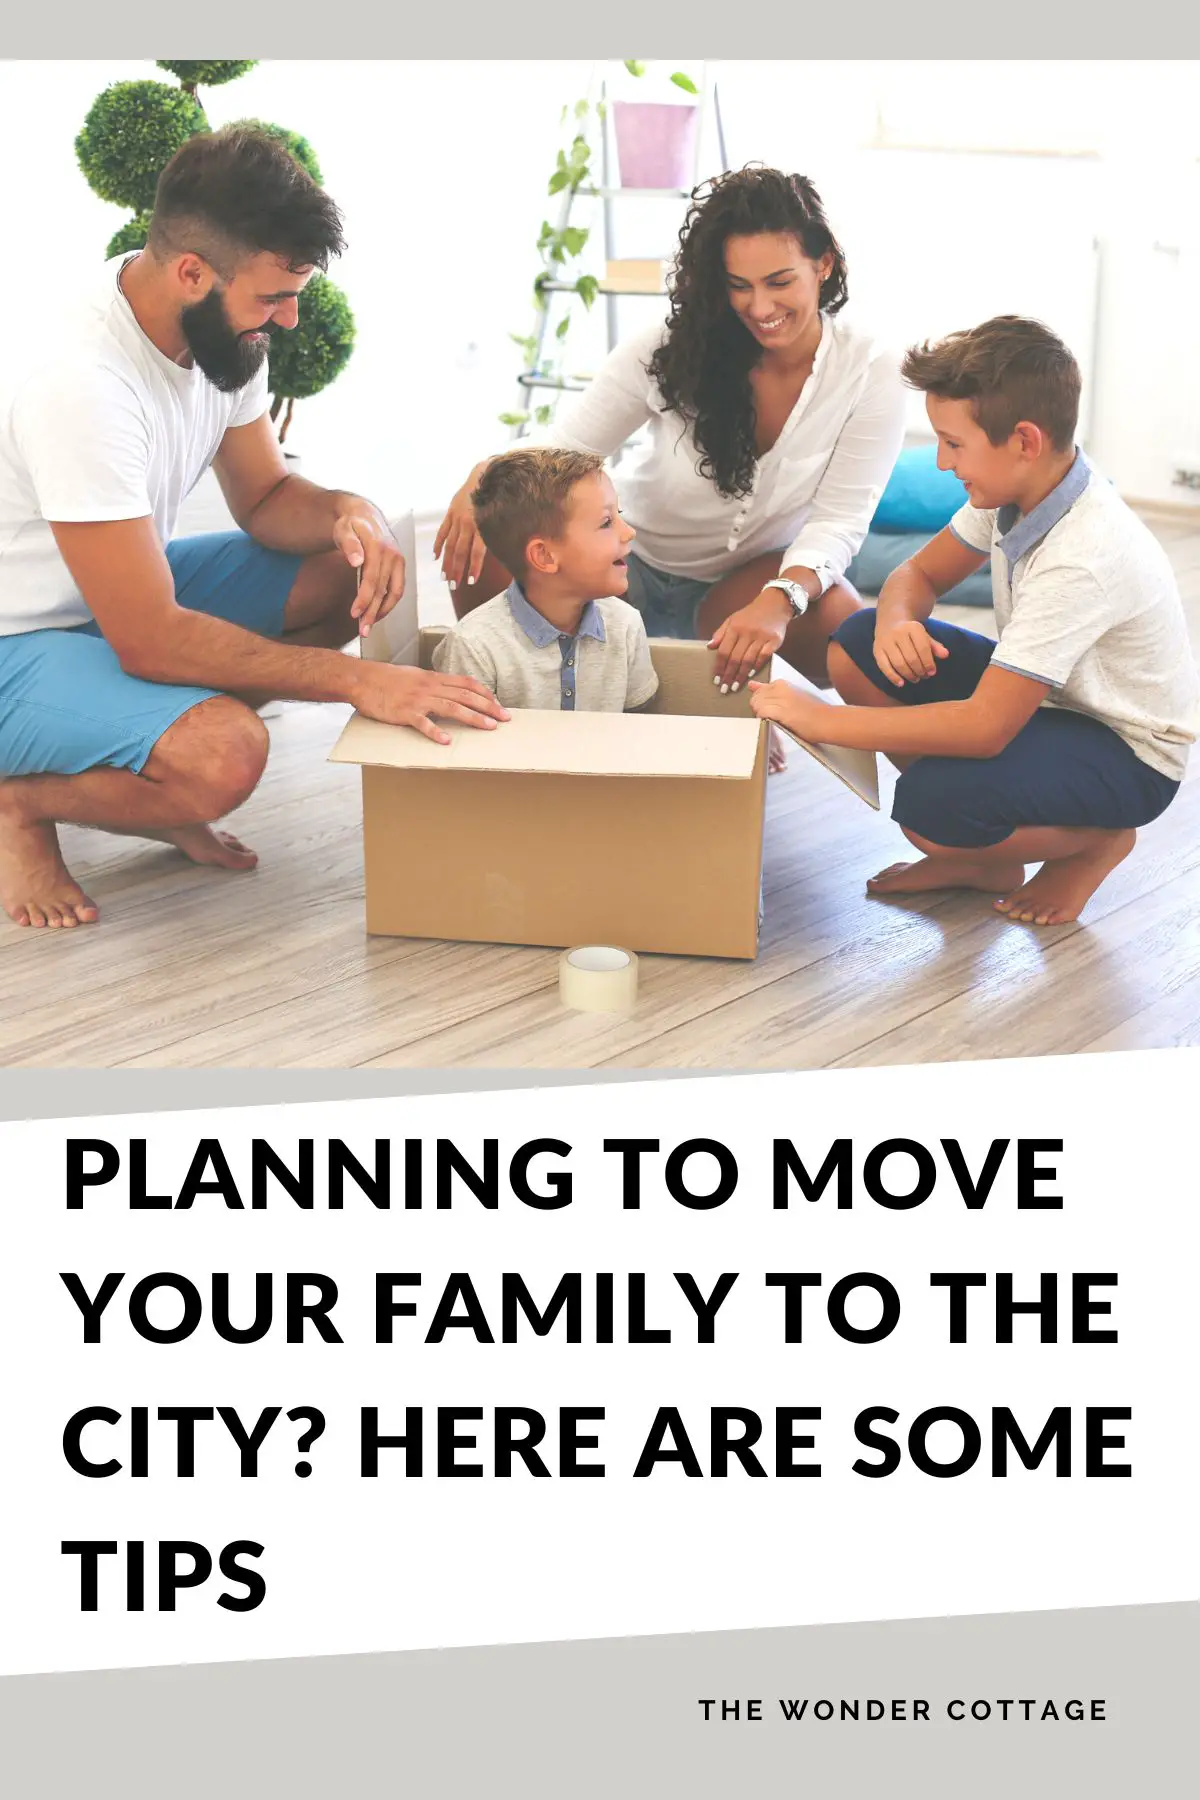 Planning To Move Your Family To The City? Here Are Some Tips